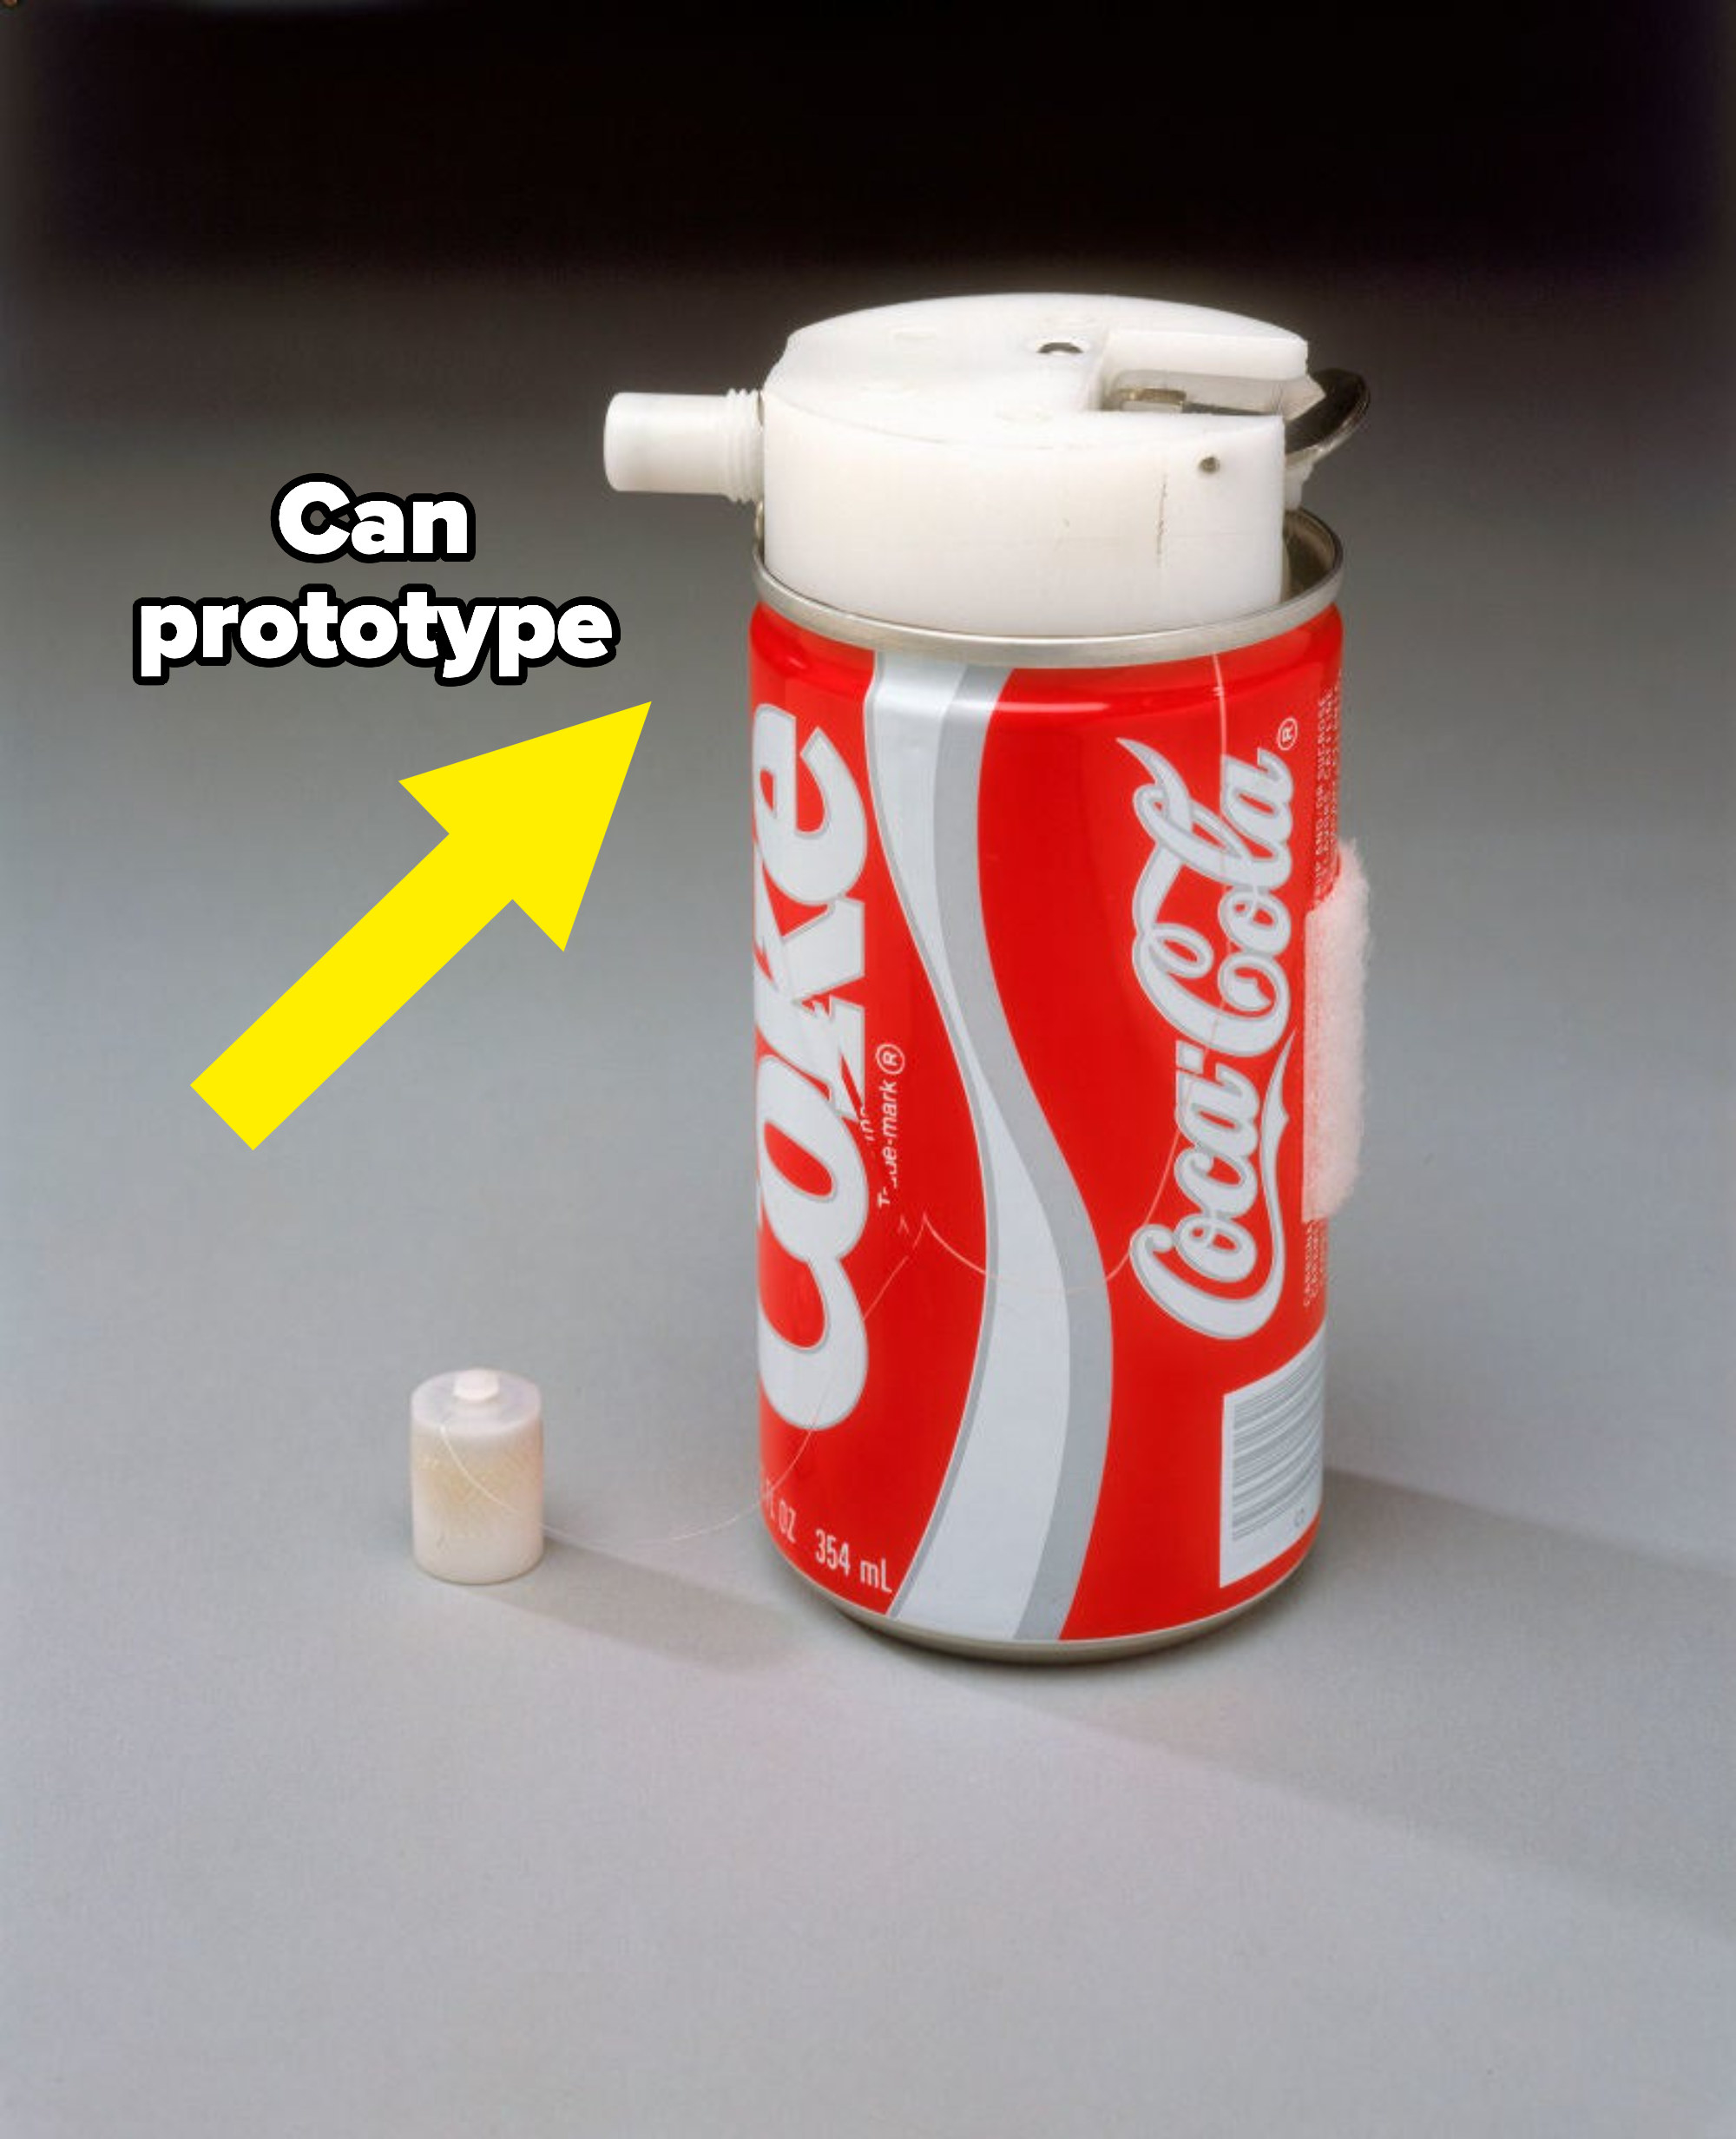 The Coca-Cola can prototype with a piece attached to the top